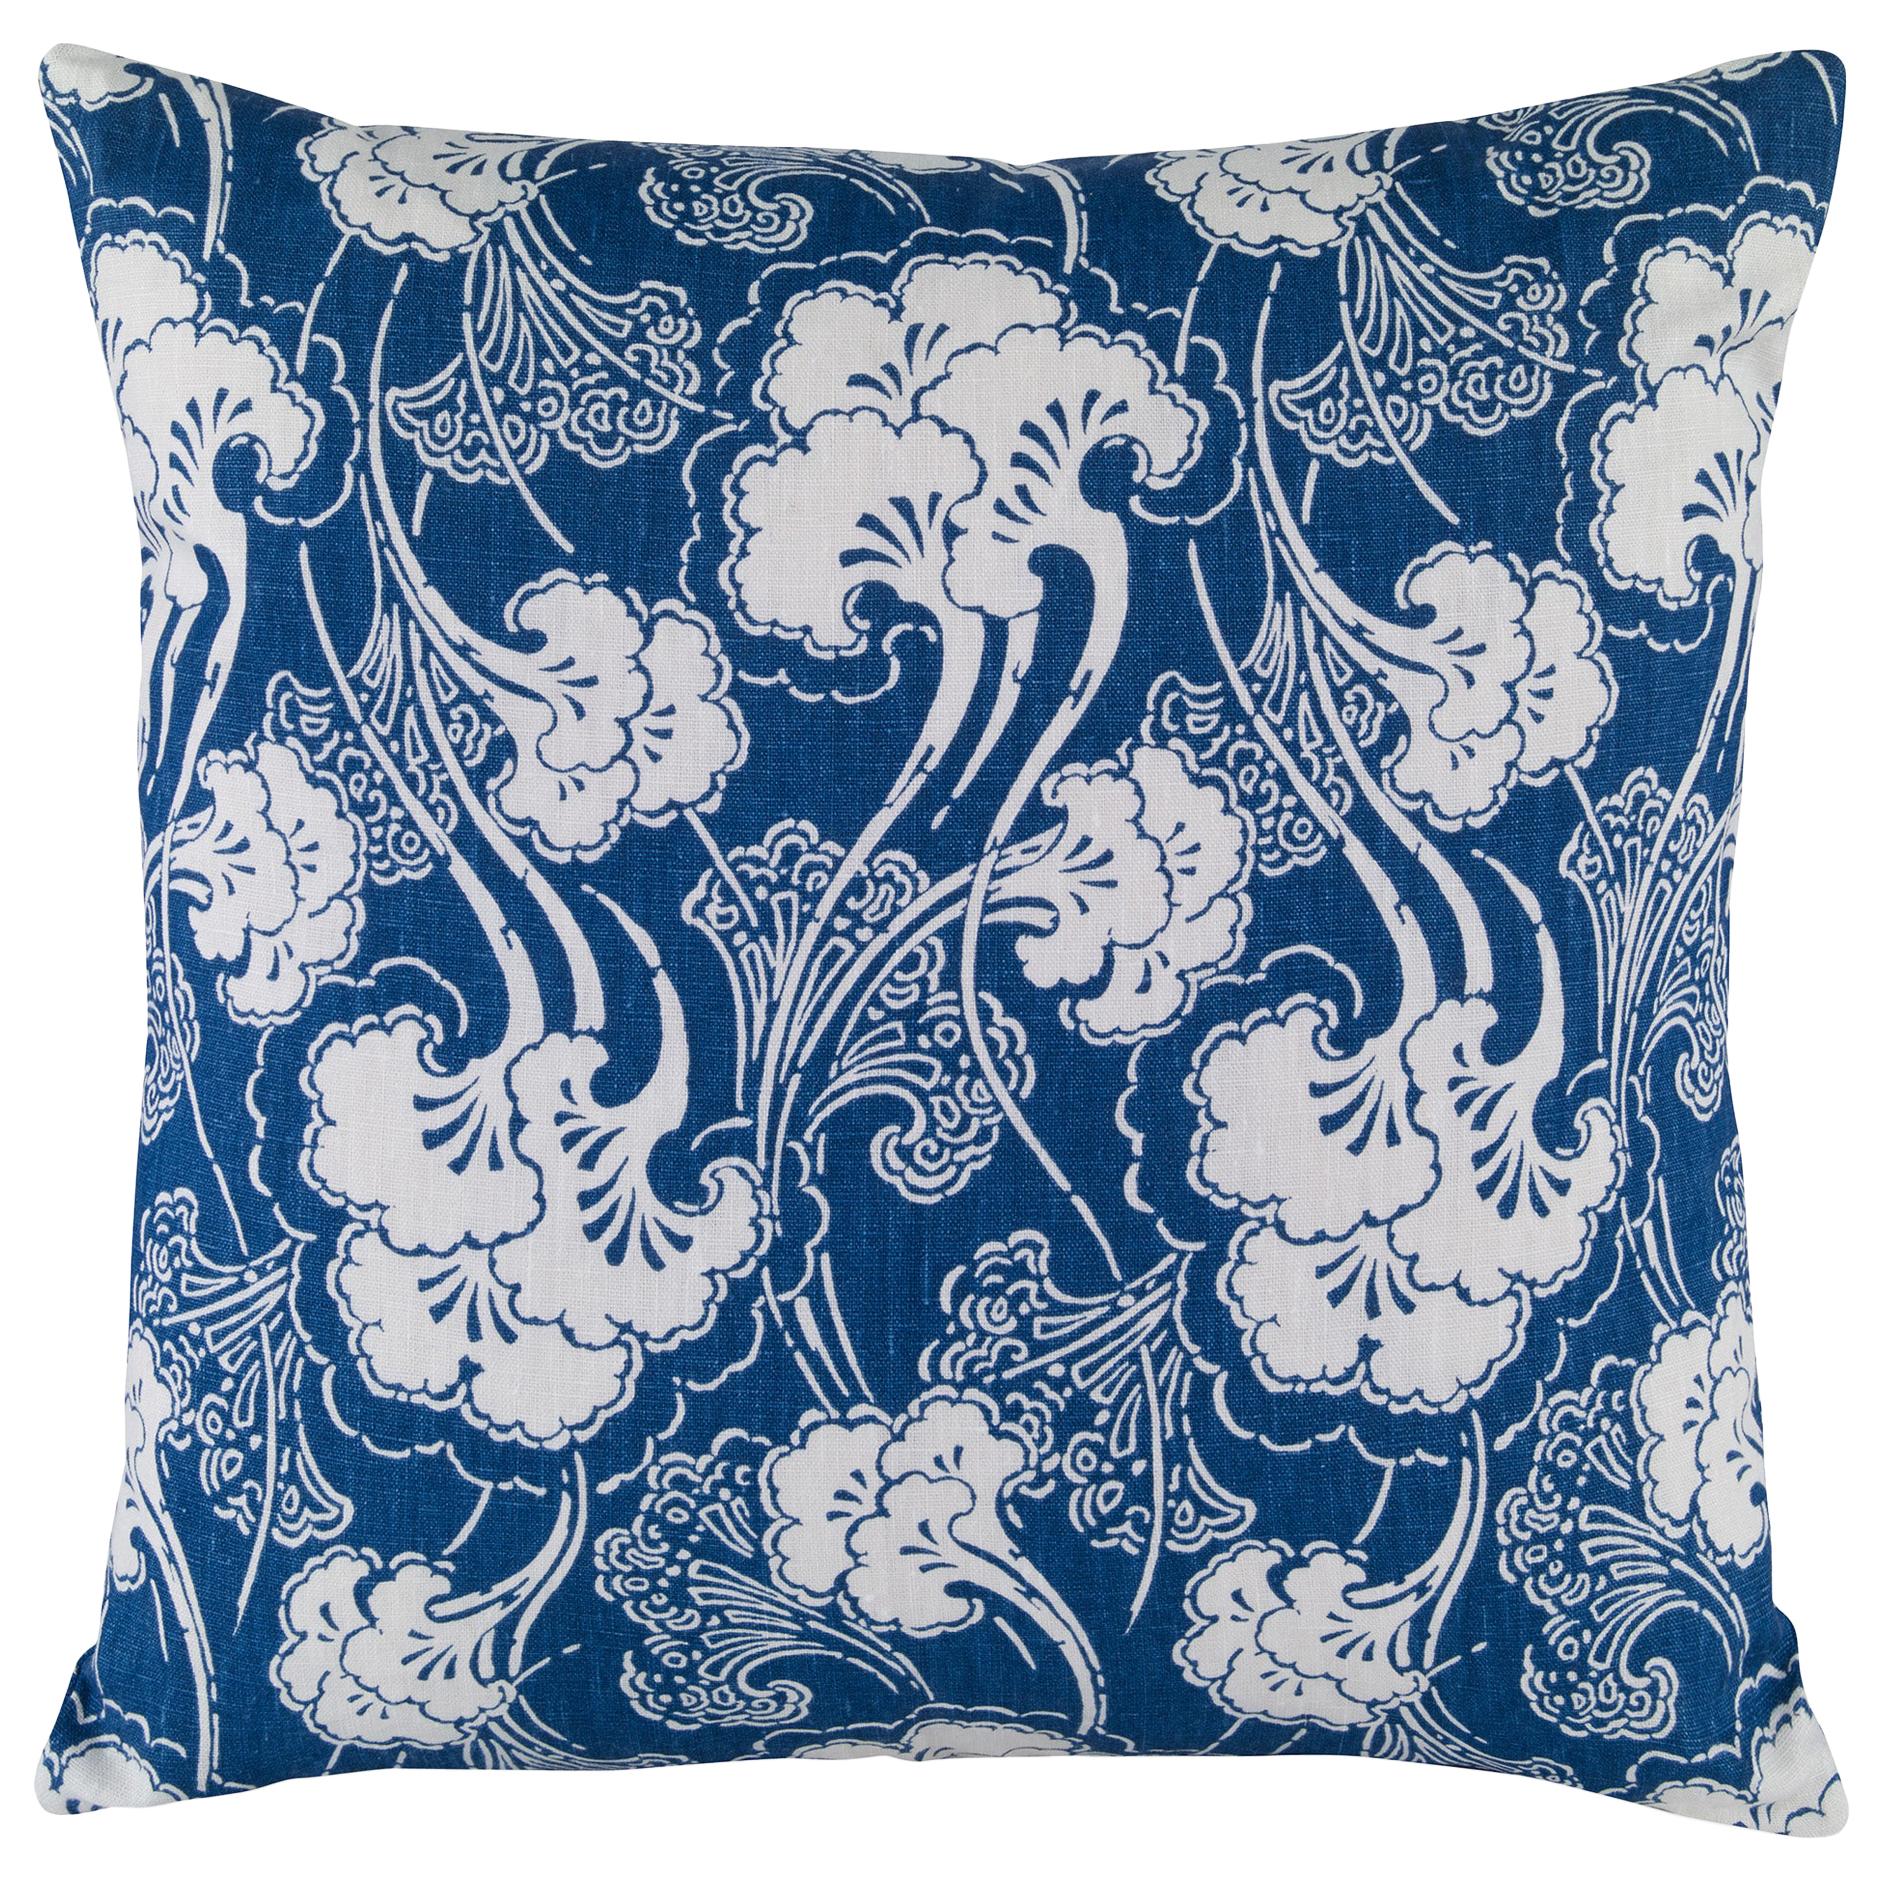 Ginkgoleaf Accent Pillow with Sarah Richardson Fabrics by CuratedKravet